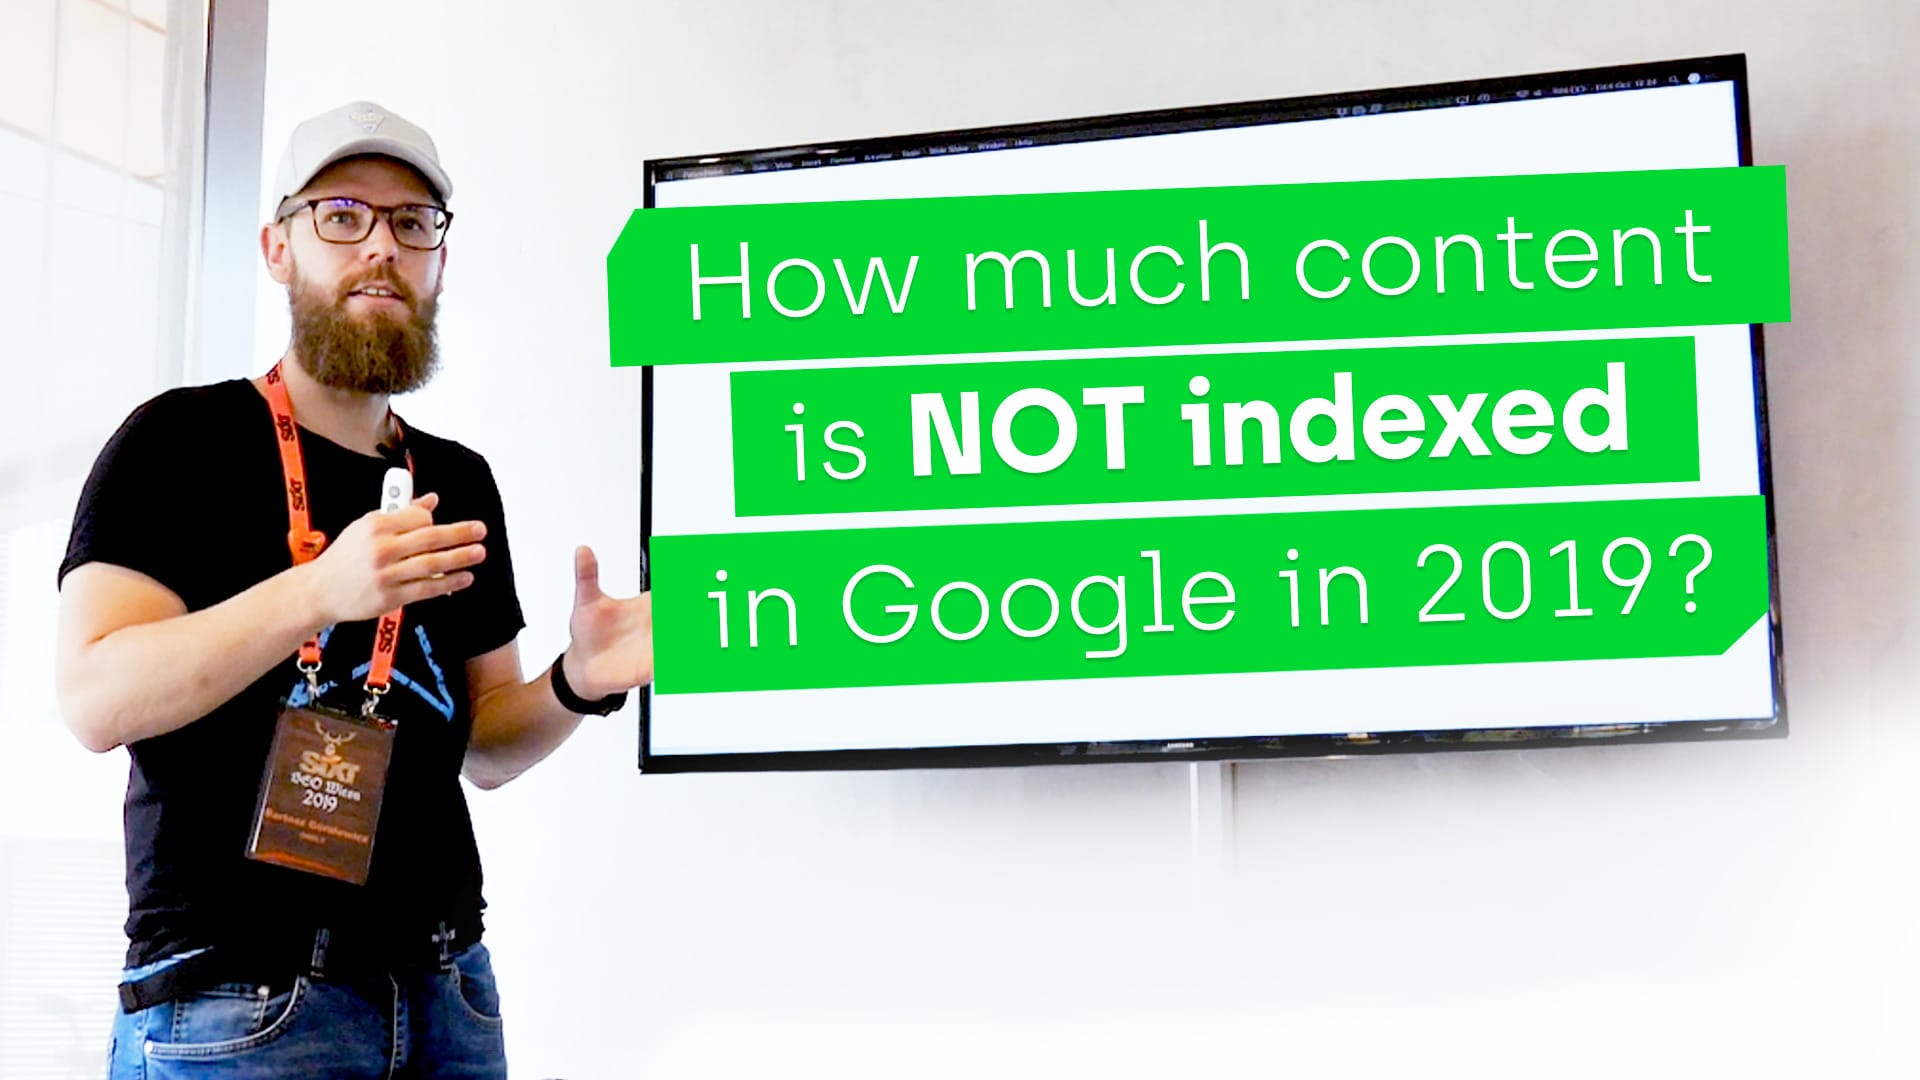 How-Much-Content-is-Not-Indexed-in-Google-in-2019 - 0.-How-Much-Content-is-Not-Indexed-in-Google-in-2019-Header